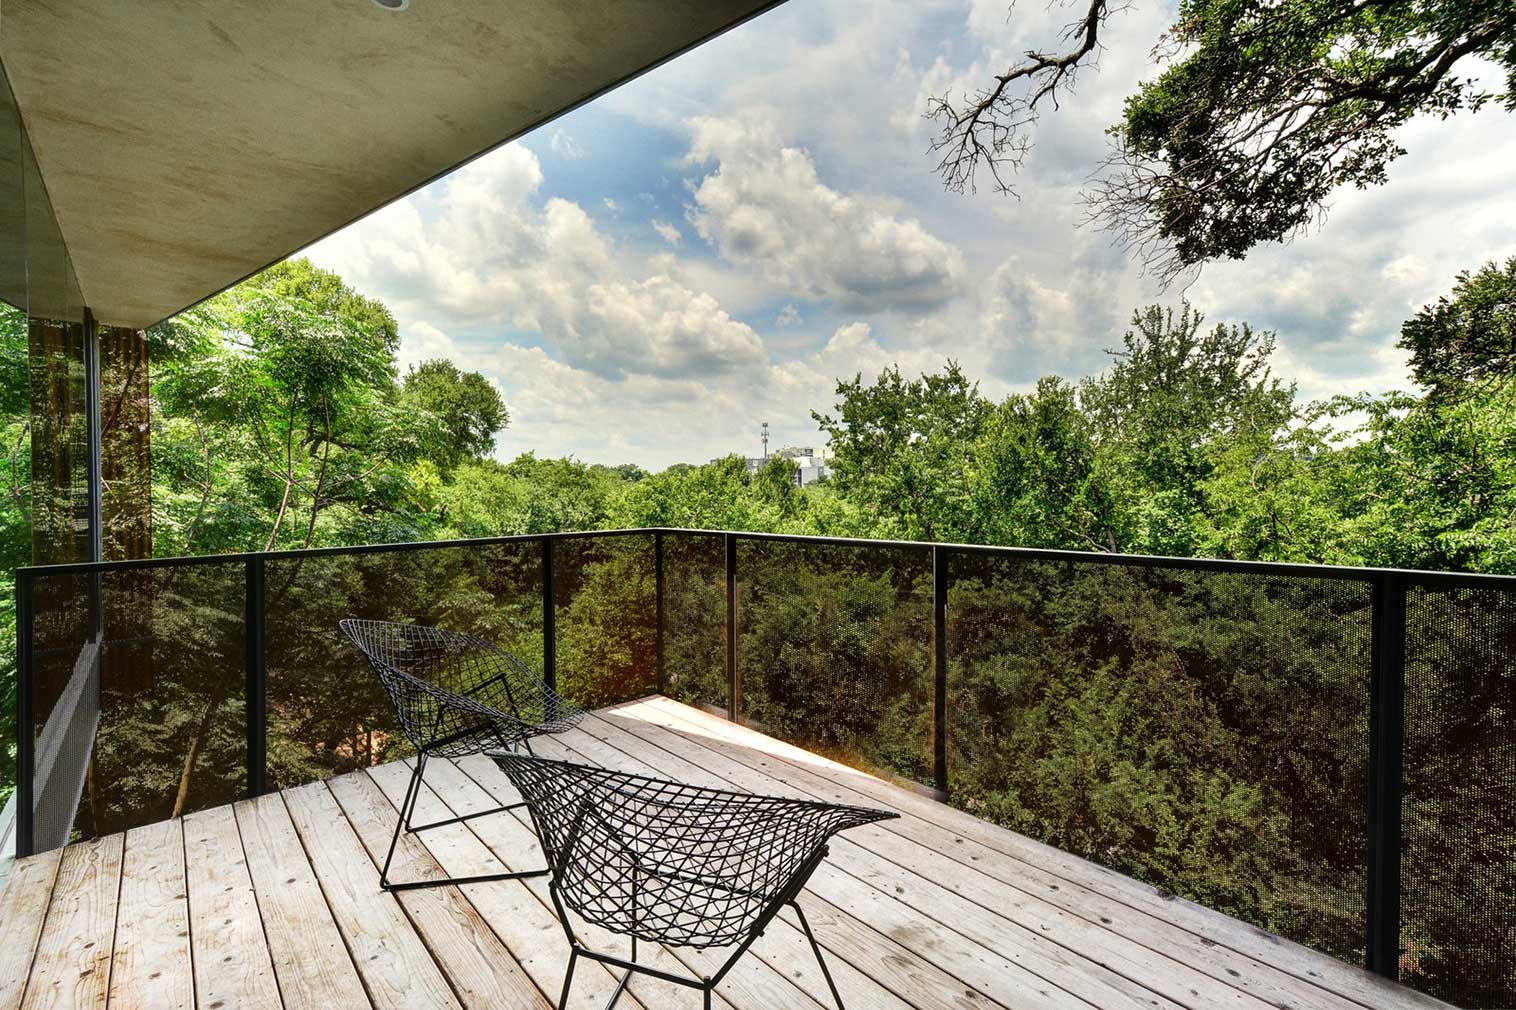 South 5th Residence - a property for sale in Austin, Texas